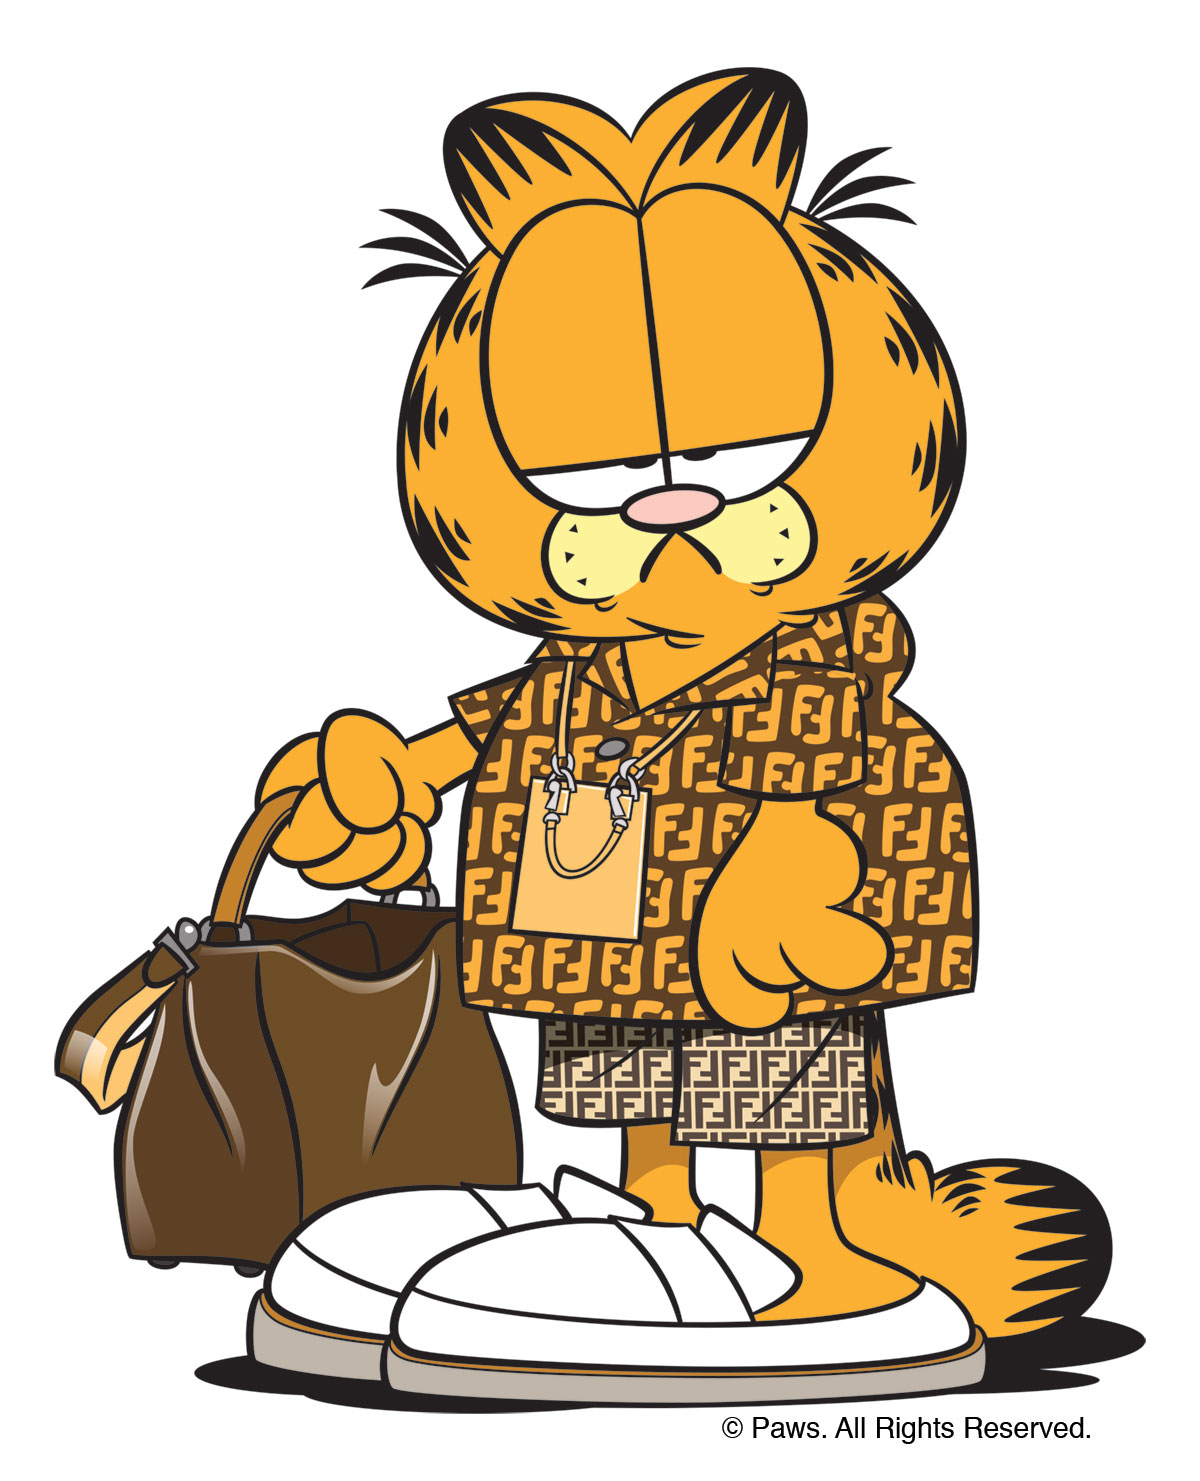 The Most Underrated Fashion Icon is Garfield the Cat